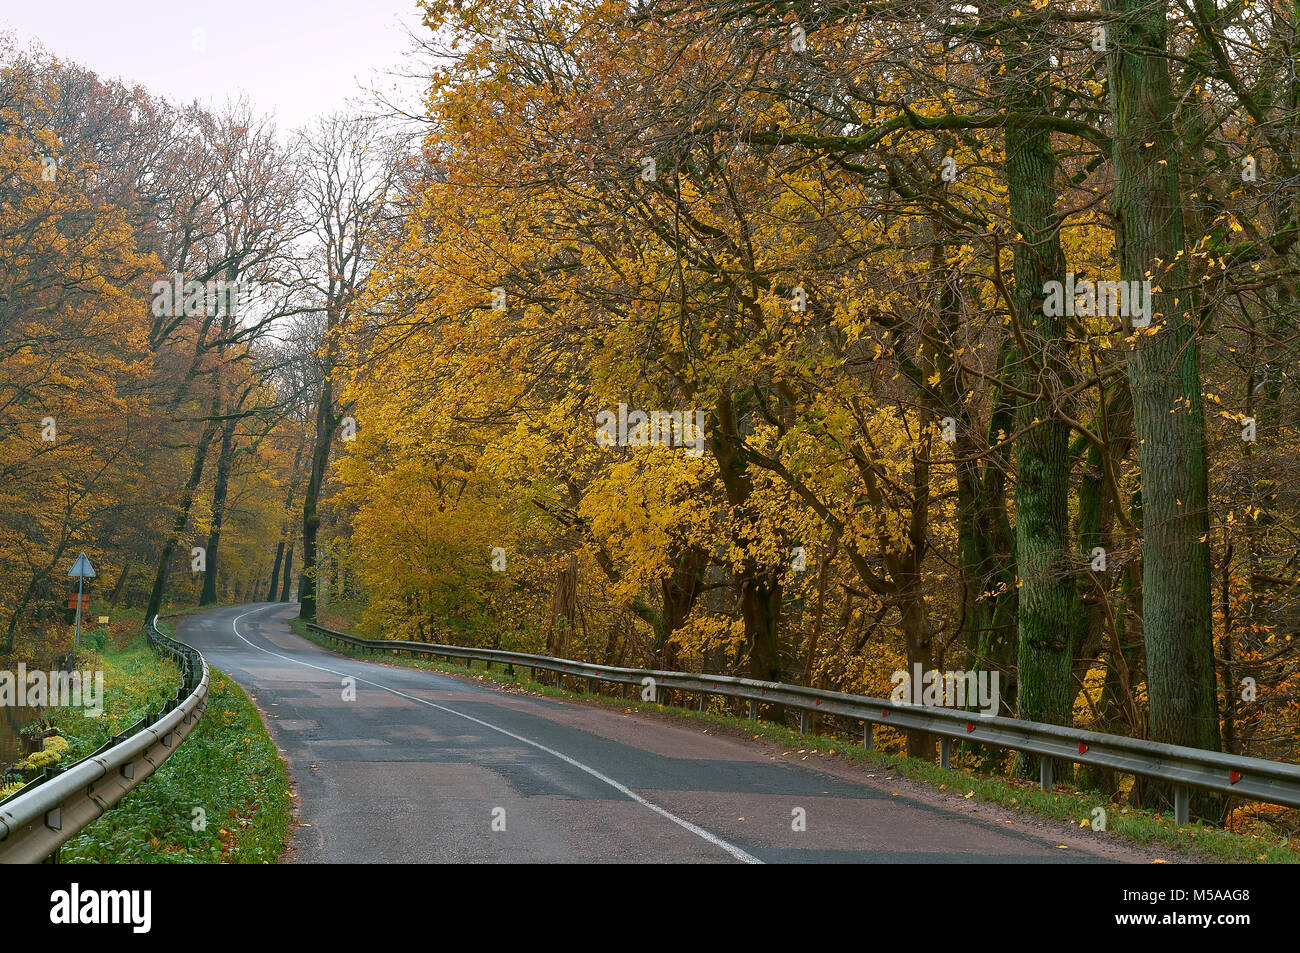 road between autumn trees, trees with yellow and red leaves on the side Stock Photo